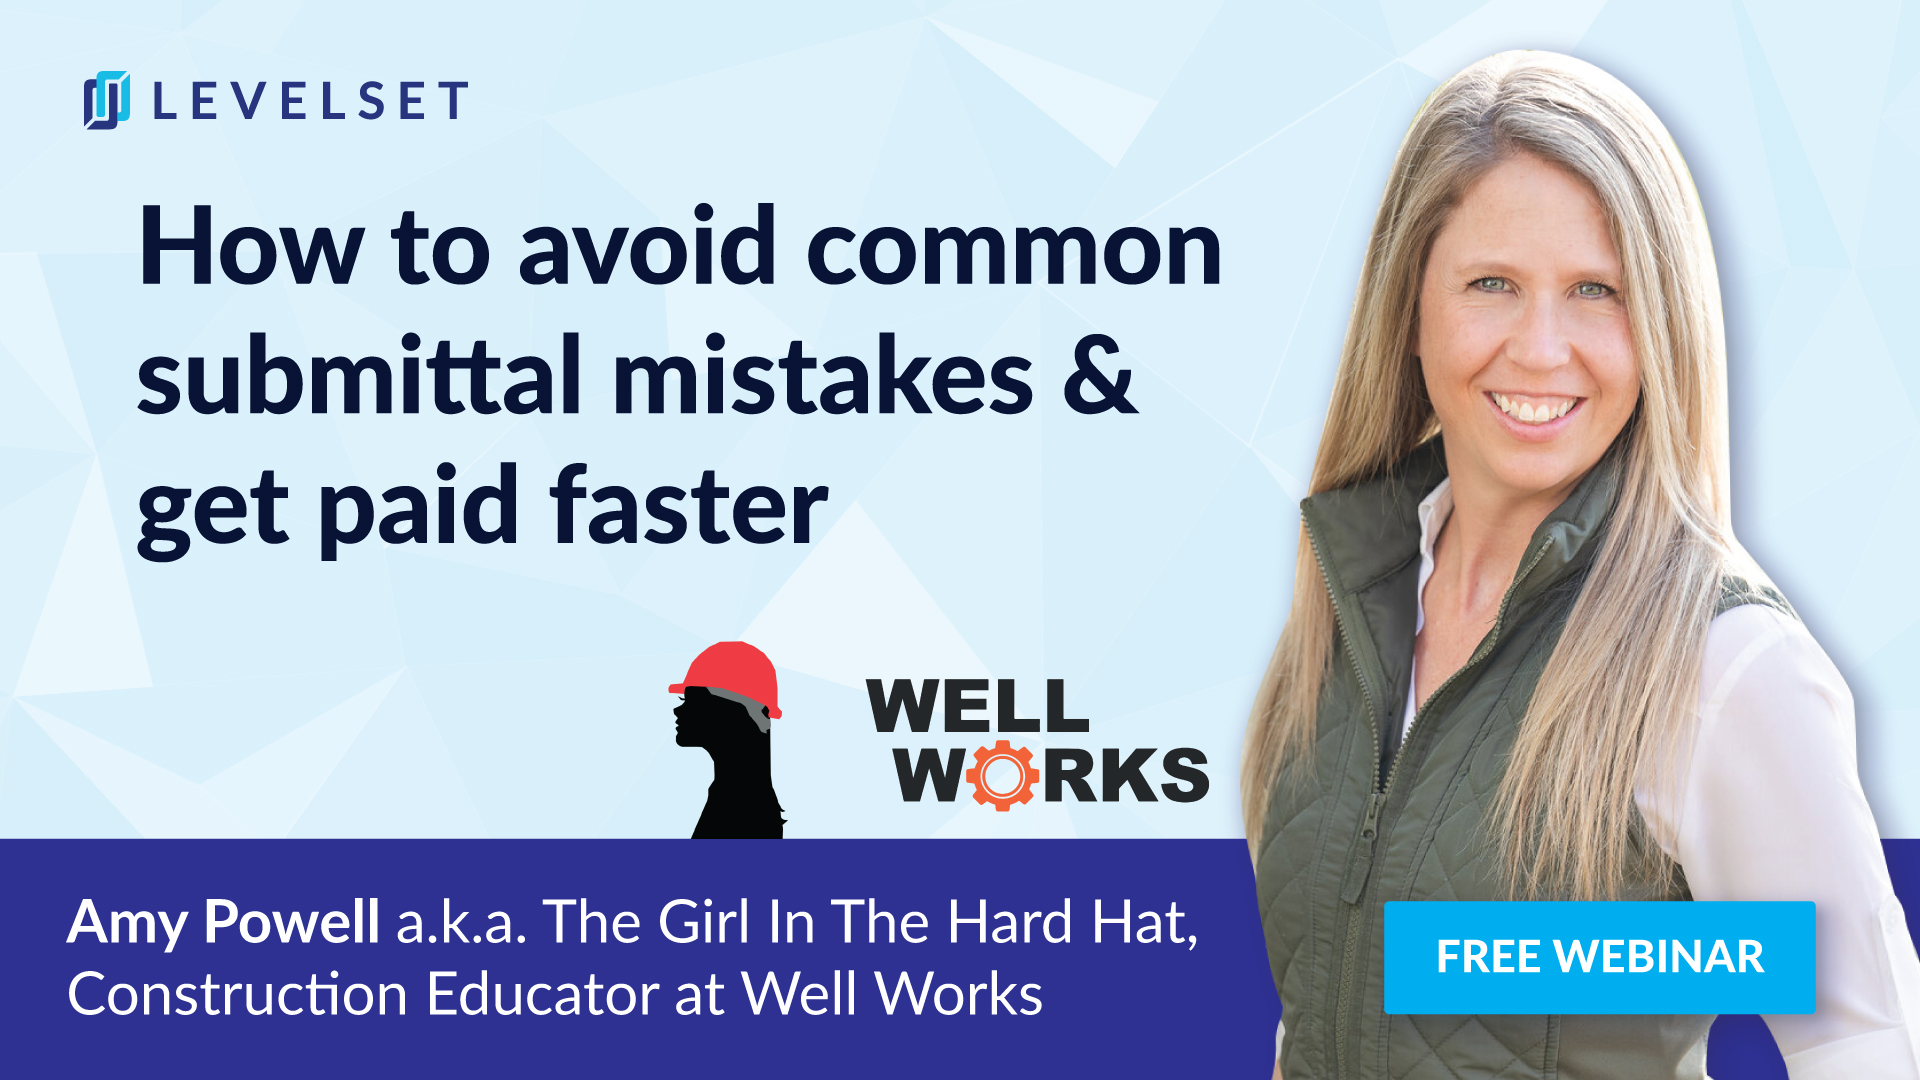 Title slide for 'How to avoid common submittal mistakes & get paid faster' with image of Amy Powell